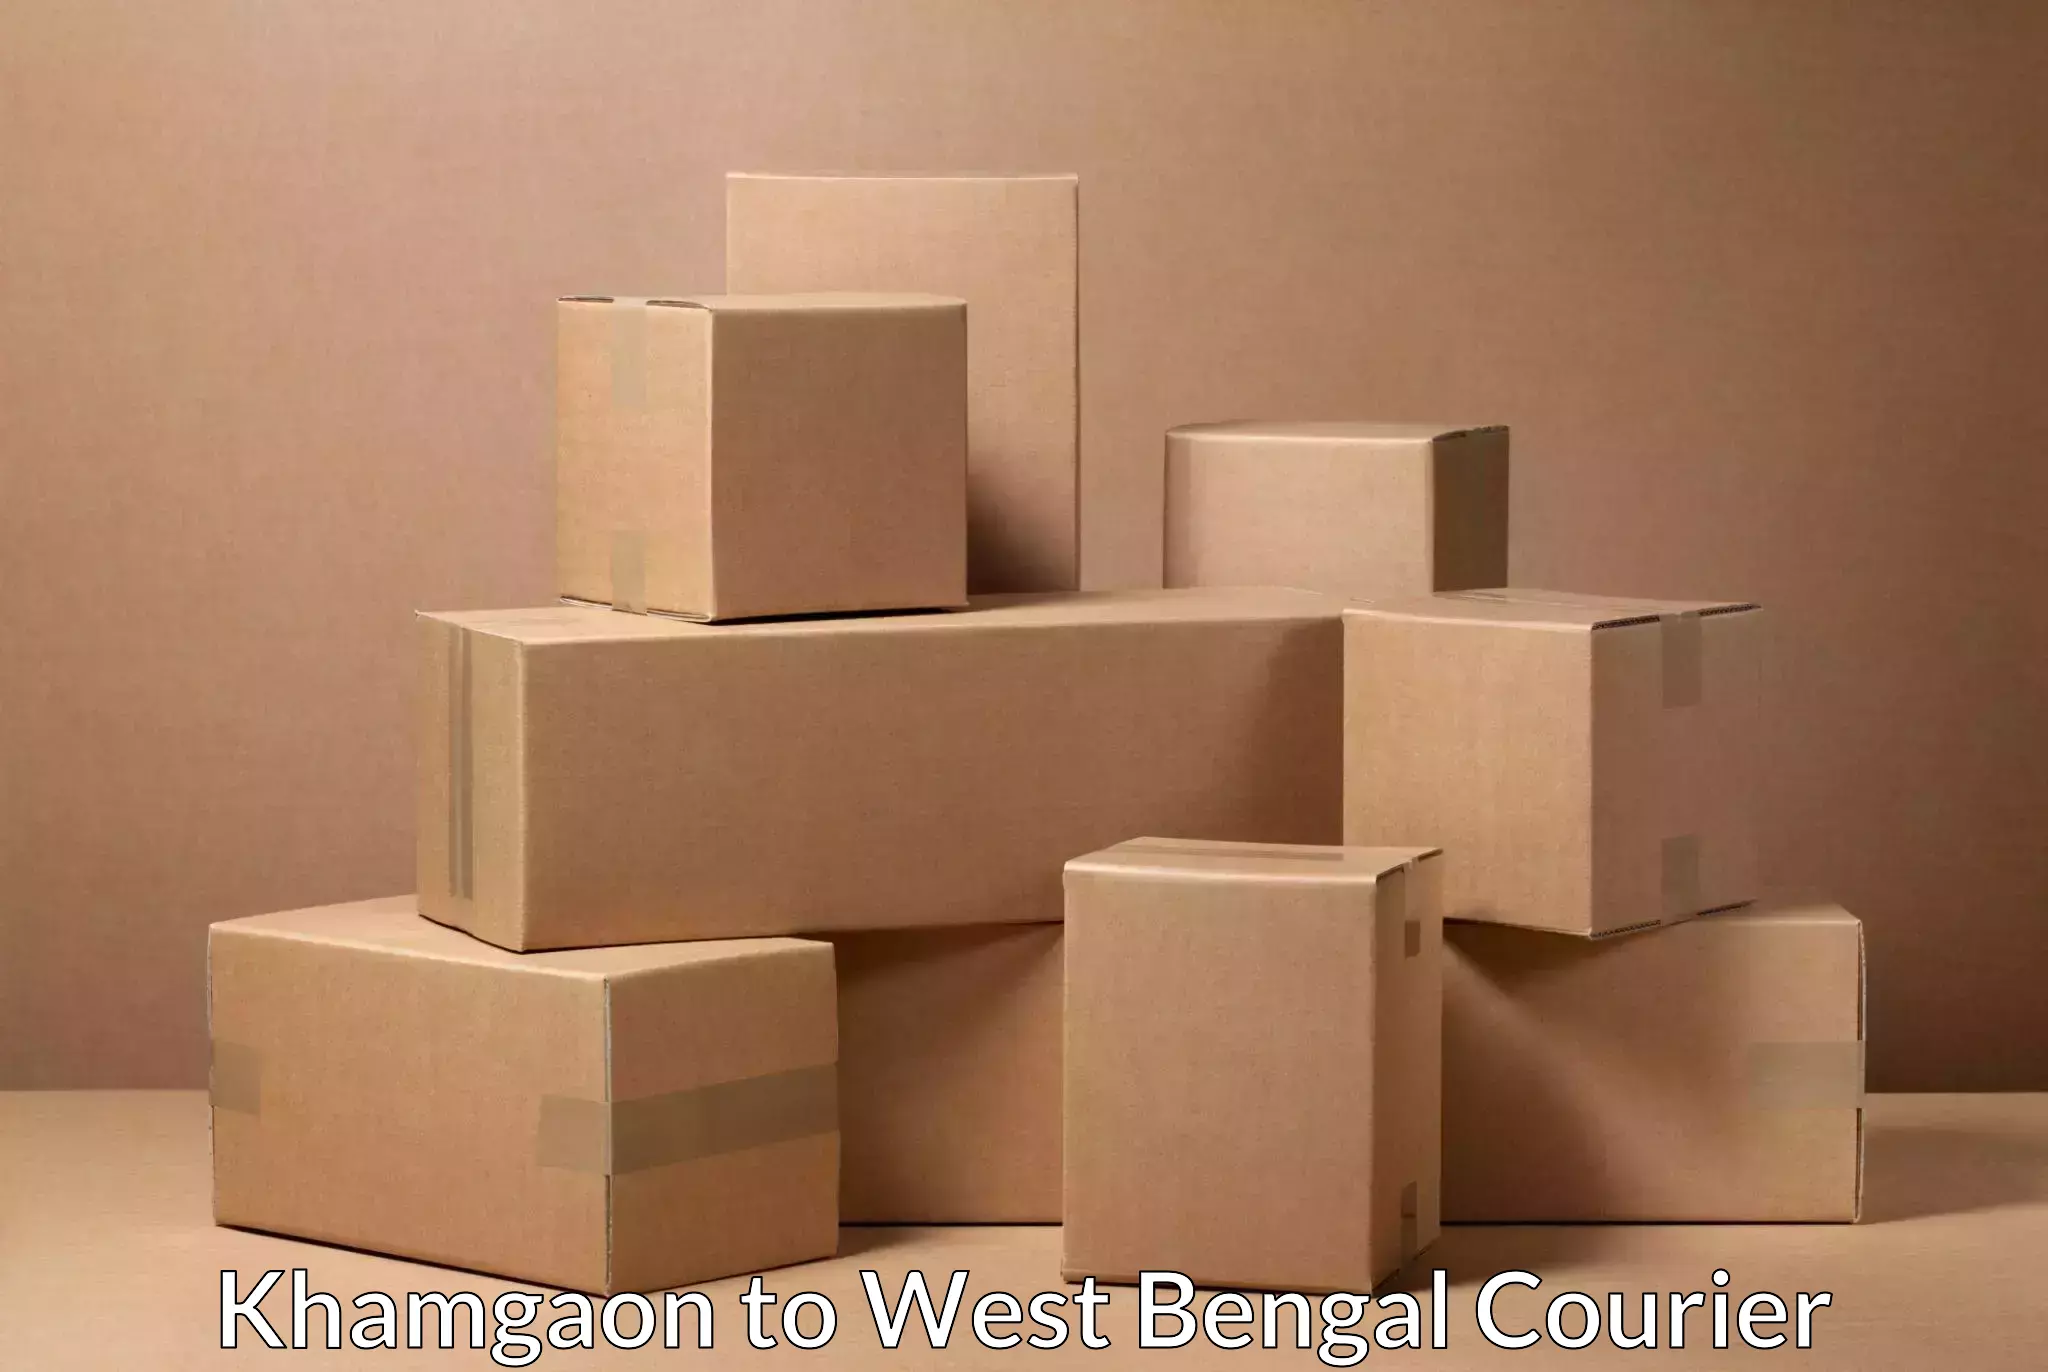 Online shipping calculator Khamgaon to West Bengal